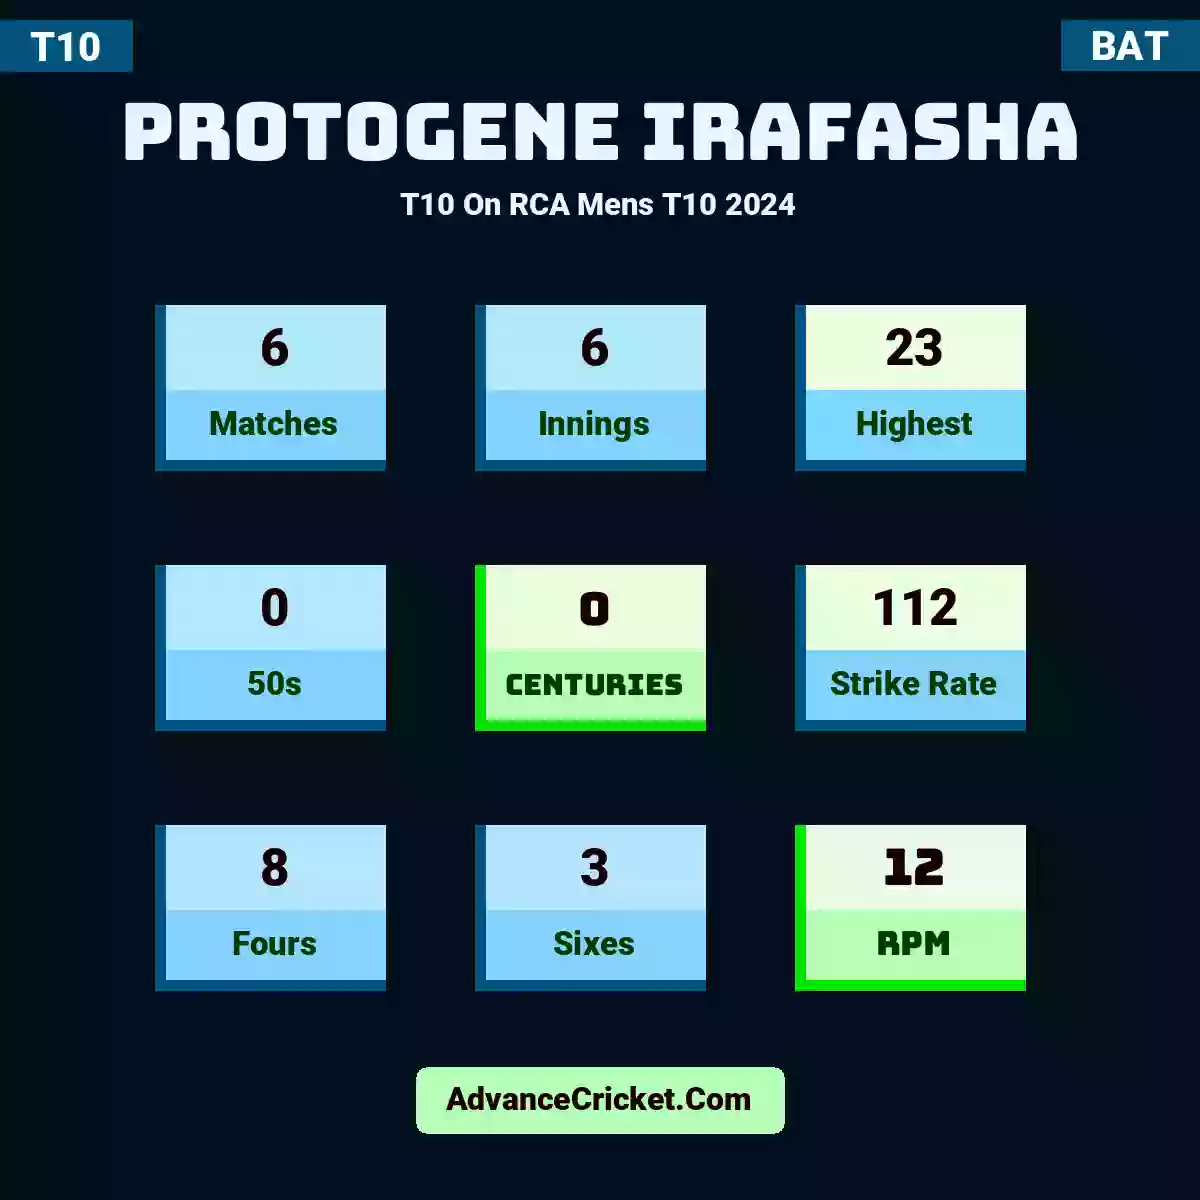 Protogene Irafasha T10  On RCA Mens T10 2024, Protogene Irafasha played 6 matches, scored 23 runs as highest, 0 half-centuries, and 0 centuries, with a strike rate of 112. P.Irafasha hit 8 fours and 3 sixes, with an RPM of 12.